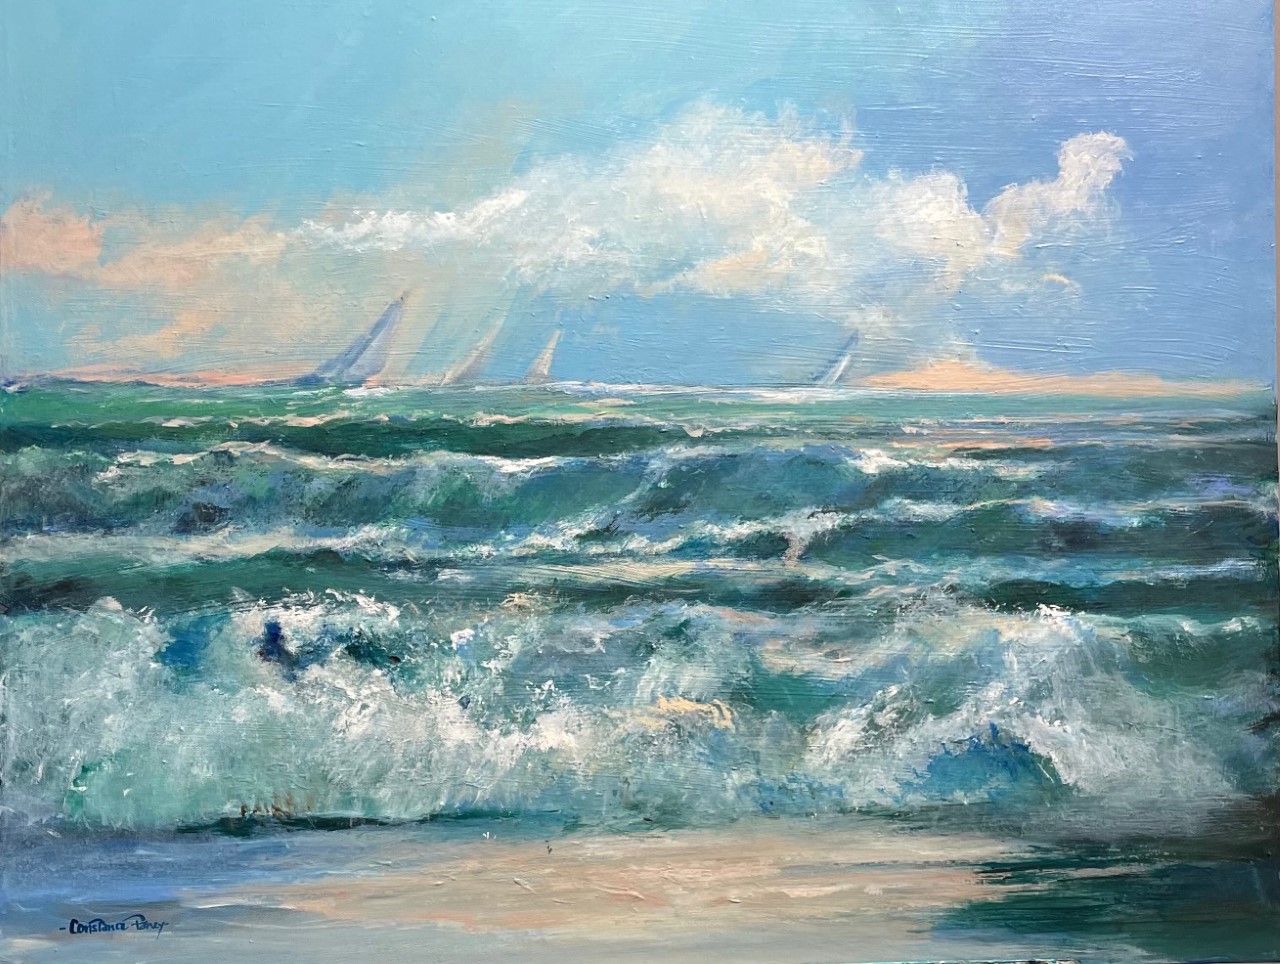 Windswept
Acrylic on Canvas
24 x 30
Constance Fahey
Rough Seas with Sailboats on a Windy Day
Gallery Wrap